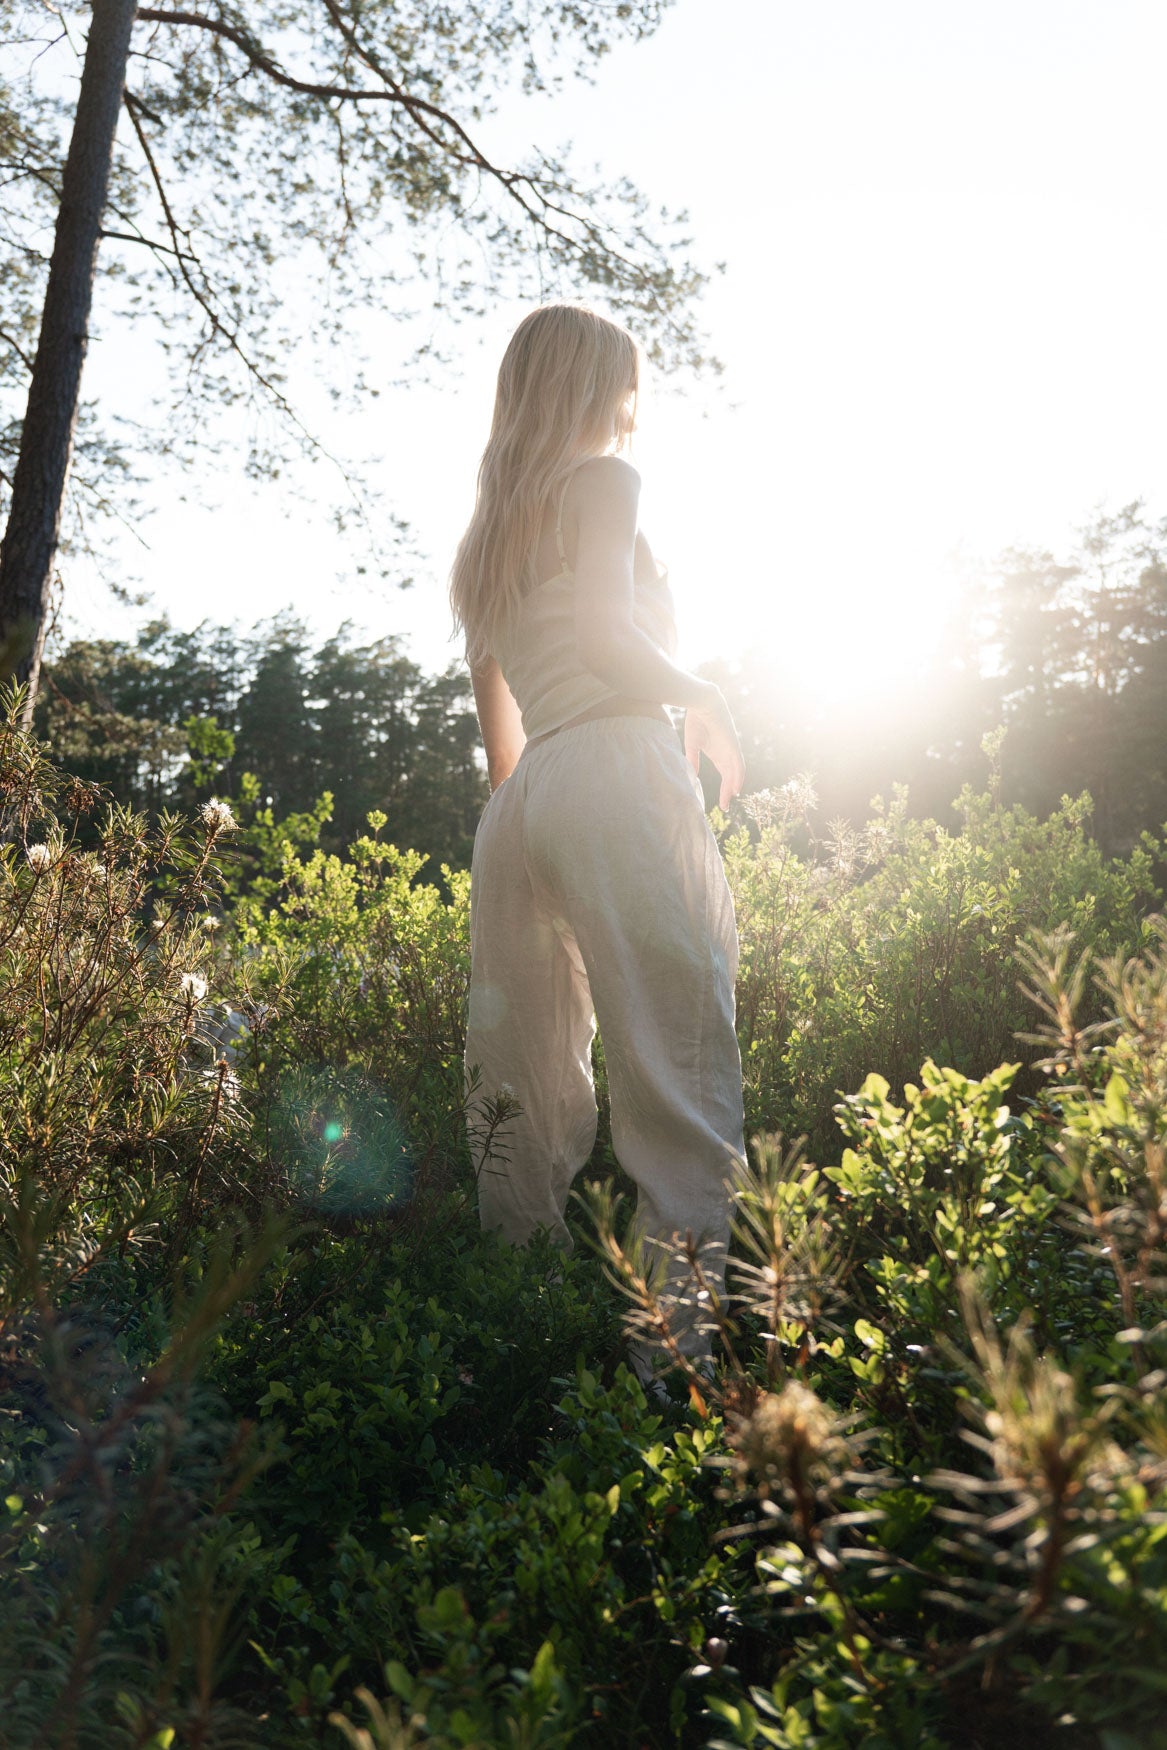 Organic, sustainable white linen pants and top that can be worn as a loungewear, pajamas or sweatpants with a top. These pants are natural, comfortable, soft and pure. These pants are a conscious and healthy choice for your body and environment. Handmade in the North.